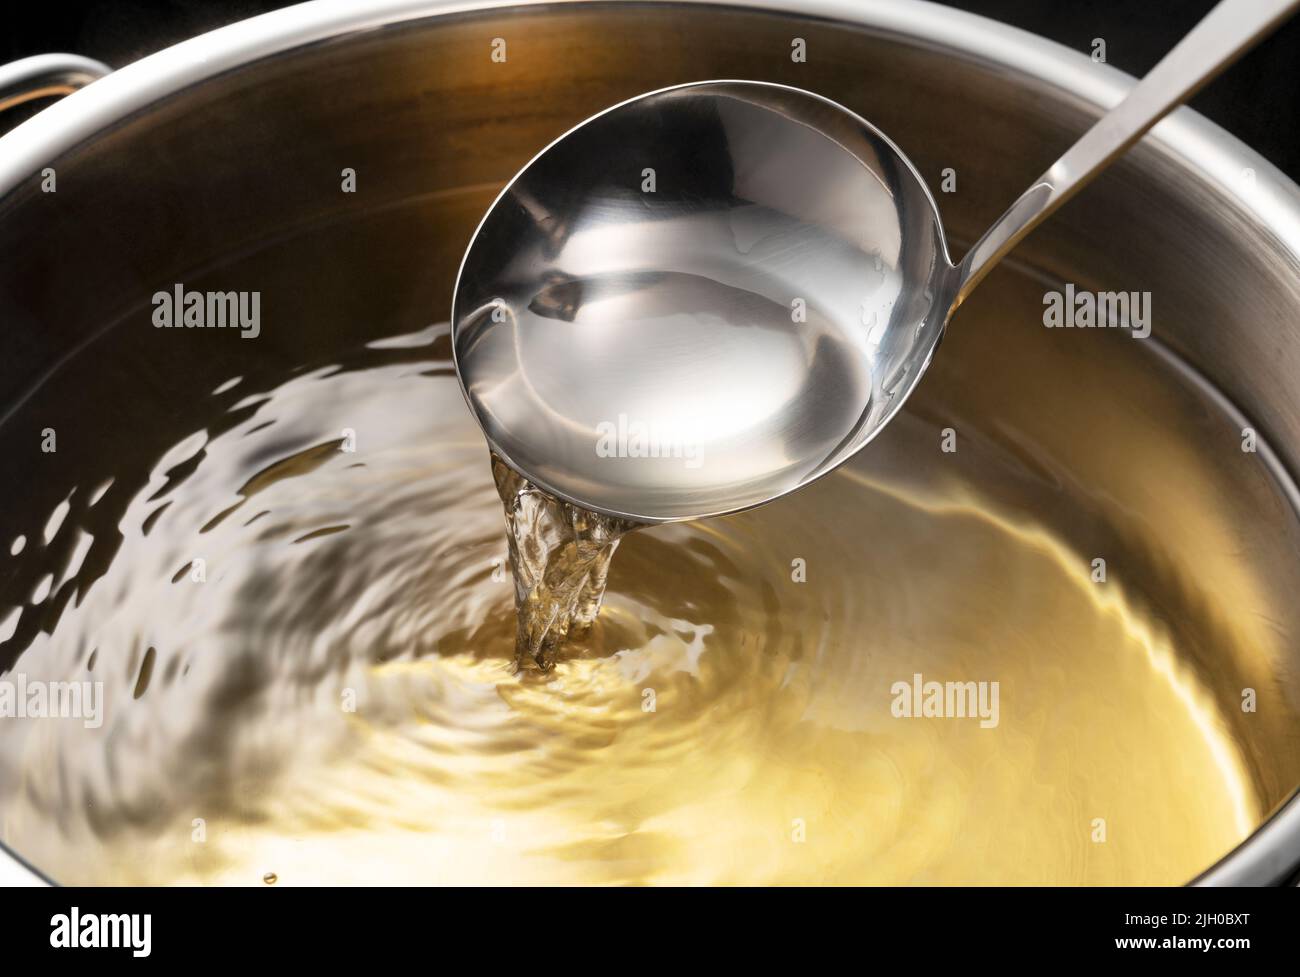 Dashi, soup stock, and the basics of Japanese cuisine. Black background. Steam. Scooping with a ladle. Stock Photo